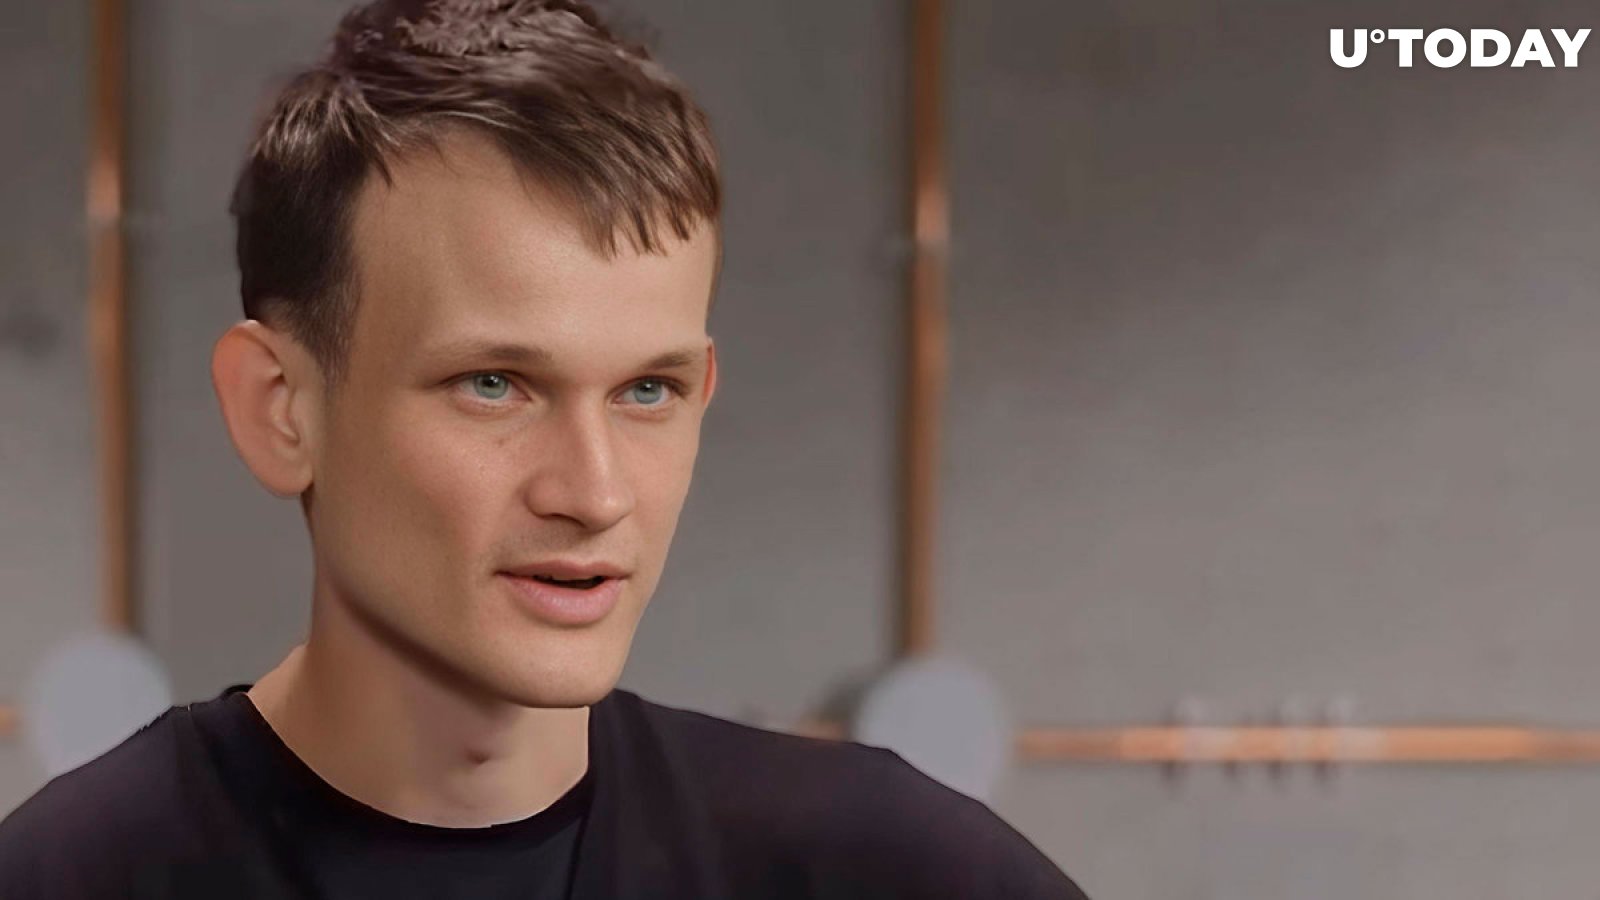 Ethereum Founder Vitalik Buterin Makes Mystery Move With Large ETH Transfer